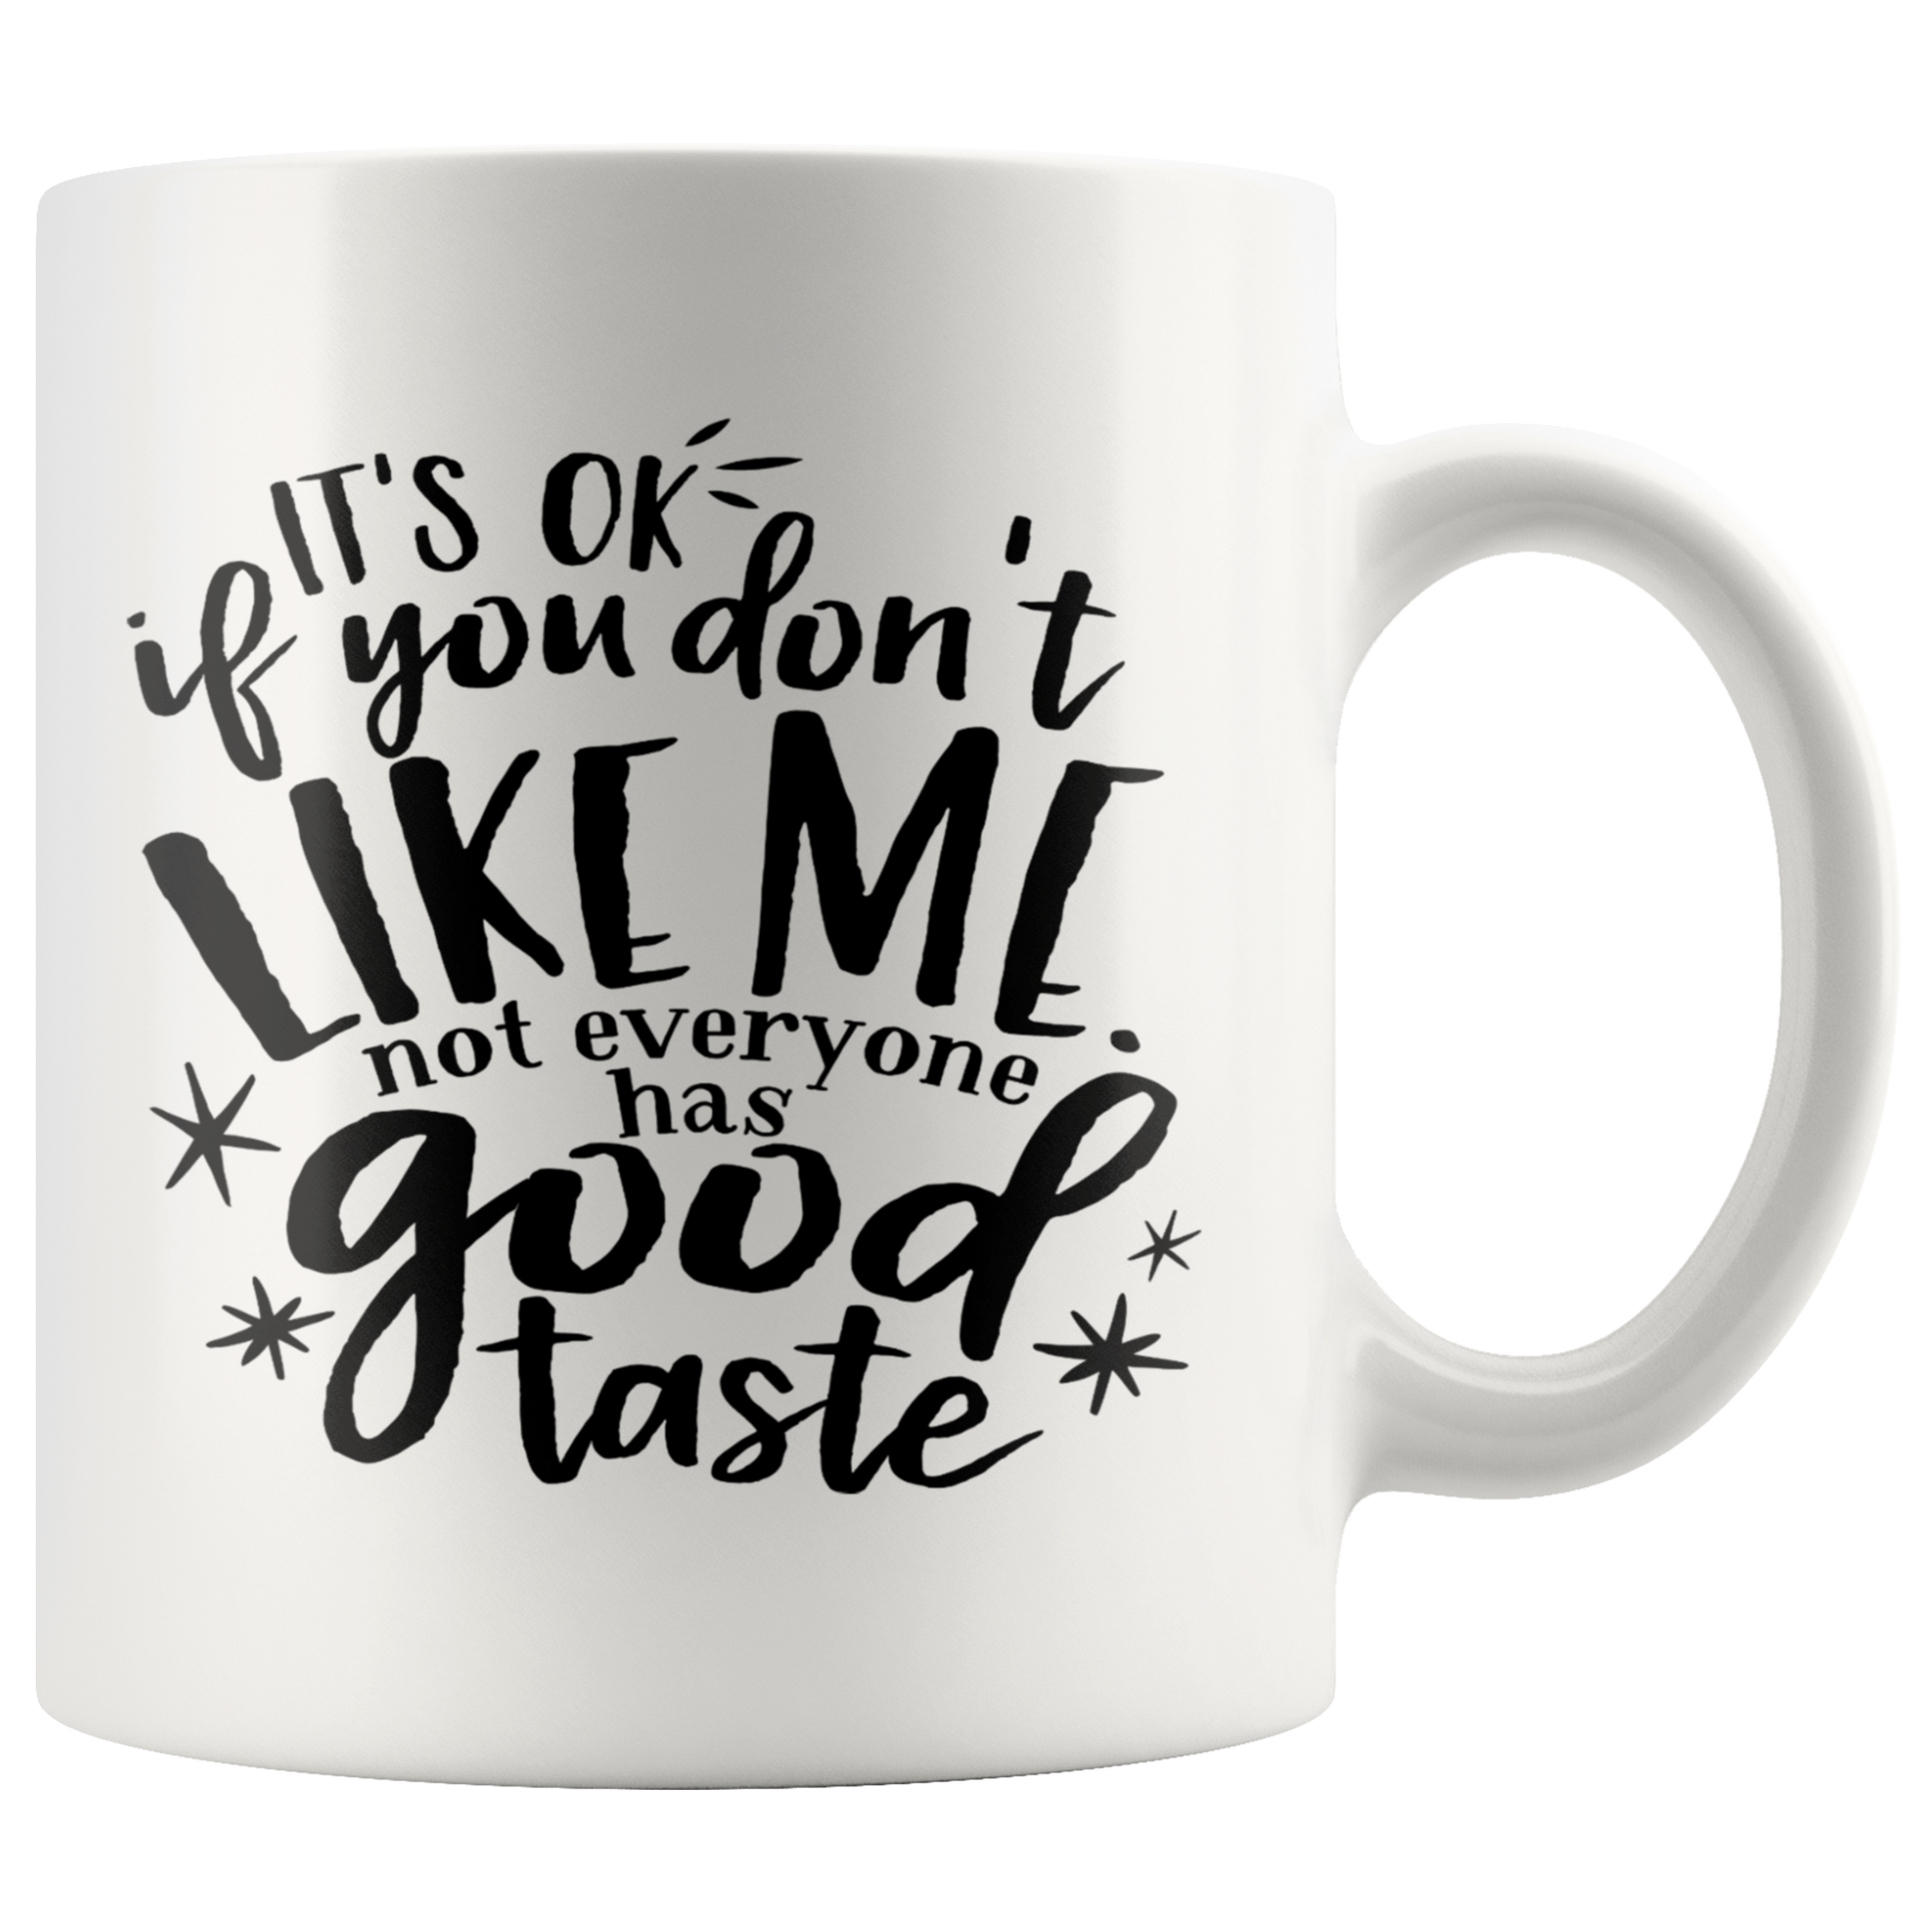 Sarcastic funny coffee mug gift for men & women office